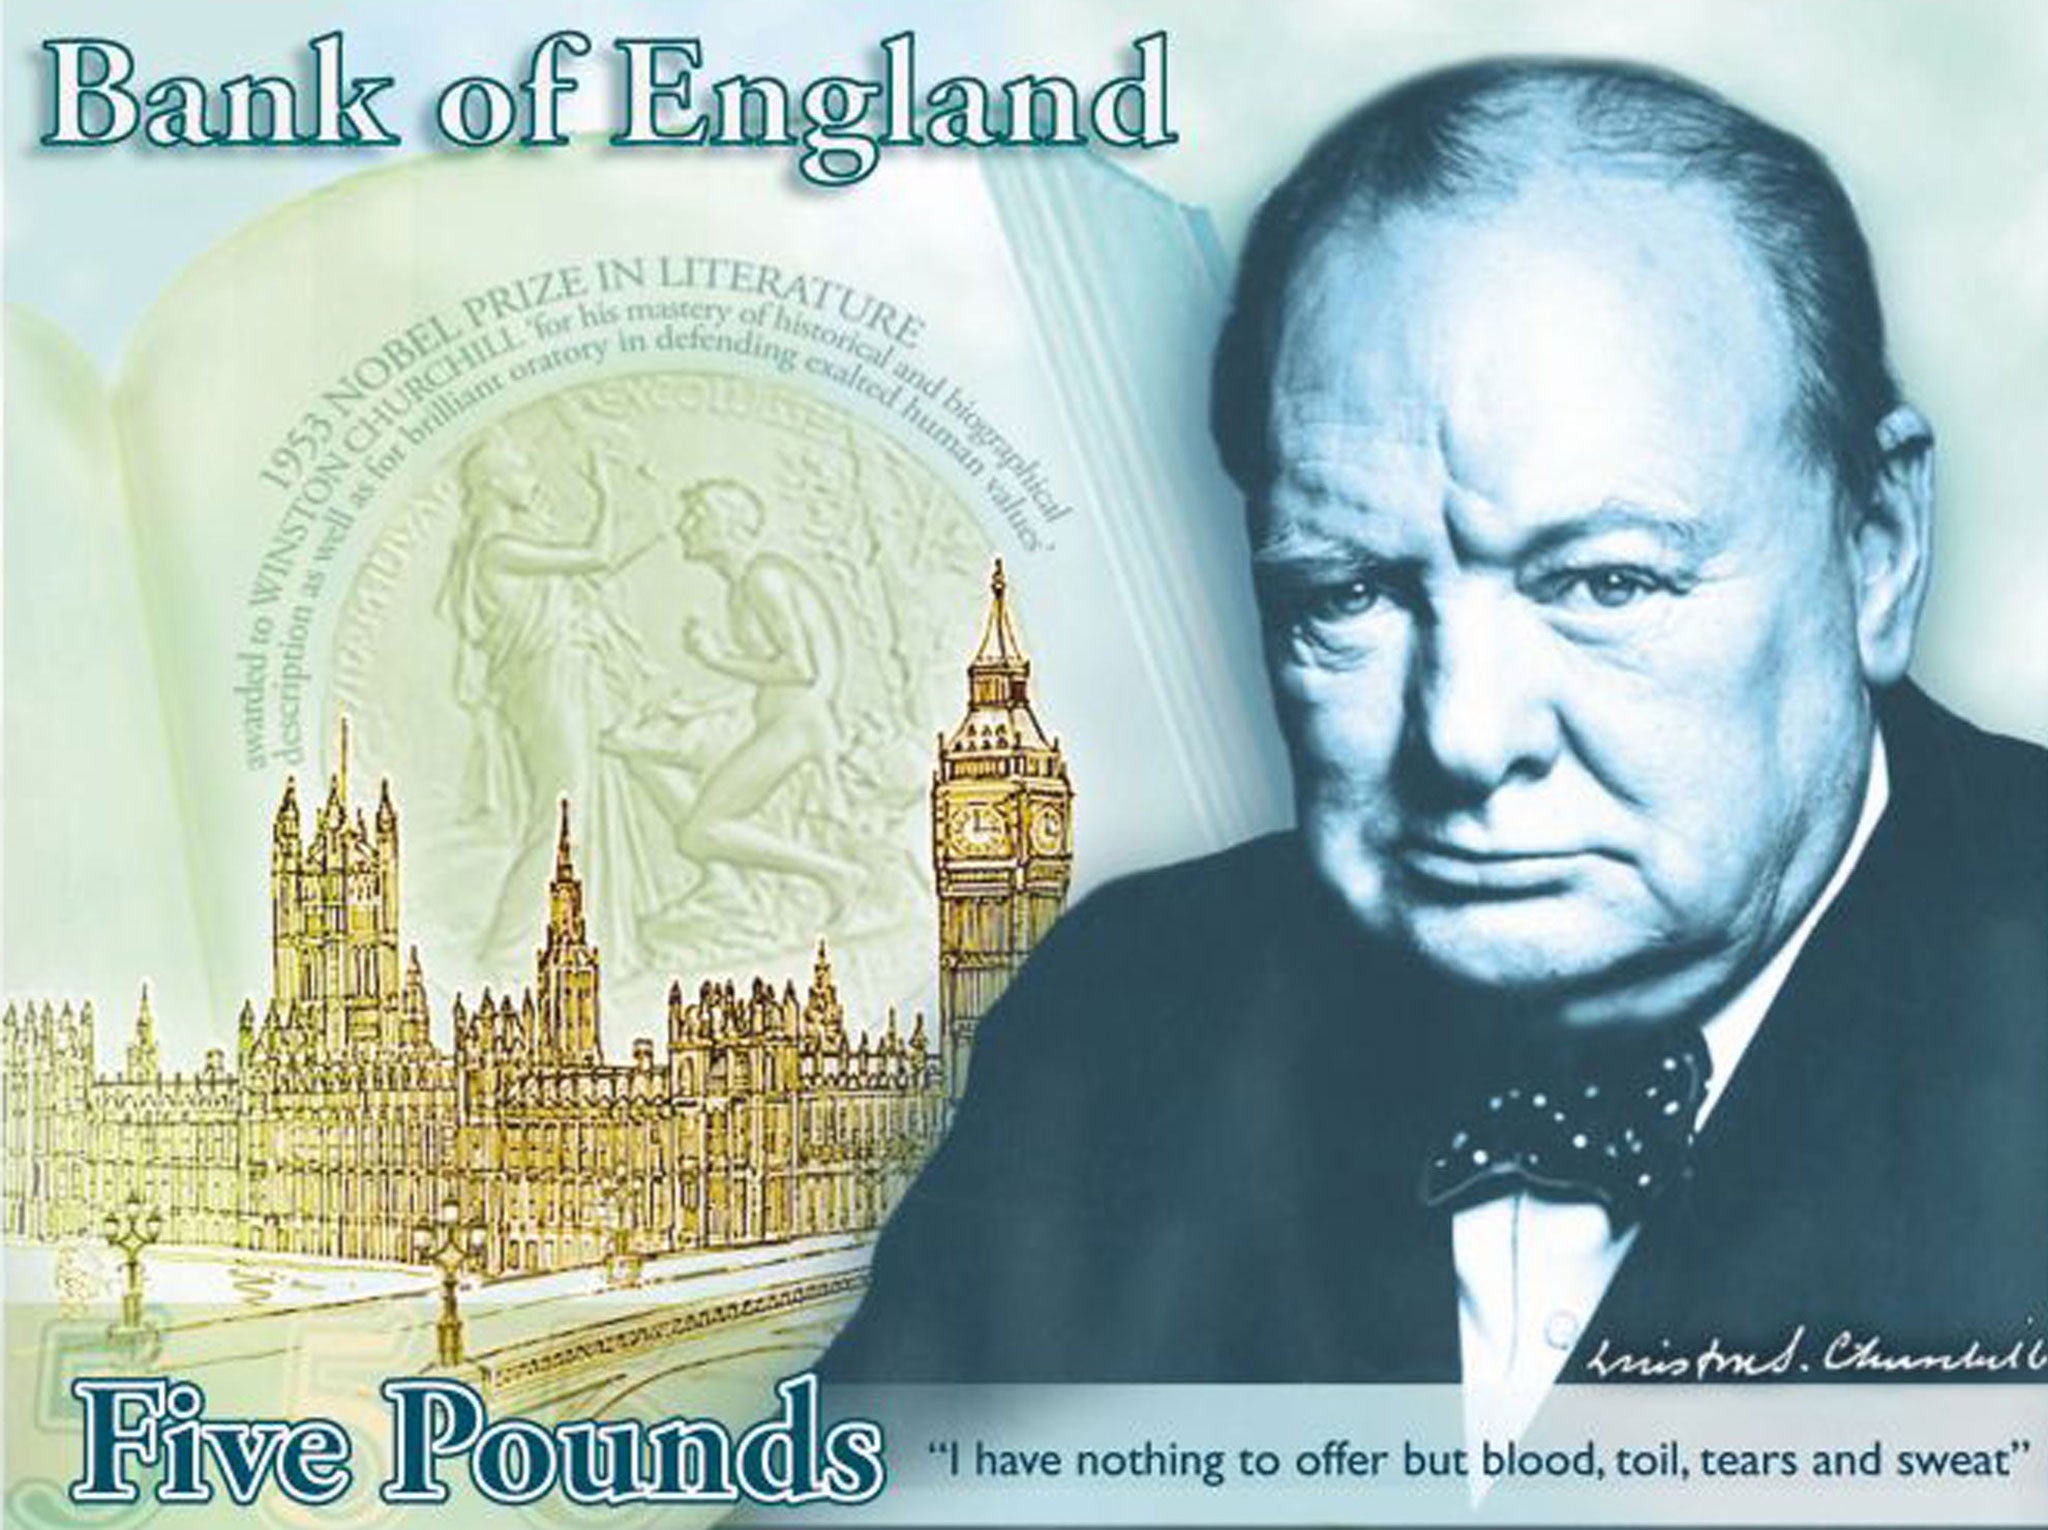 The Sir Winston Churchill banknote concept, which is set to oust the current five pound note with social reformer Elizabeth Fry as the face of the Banks of England's five pound notes